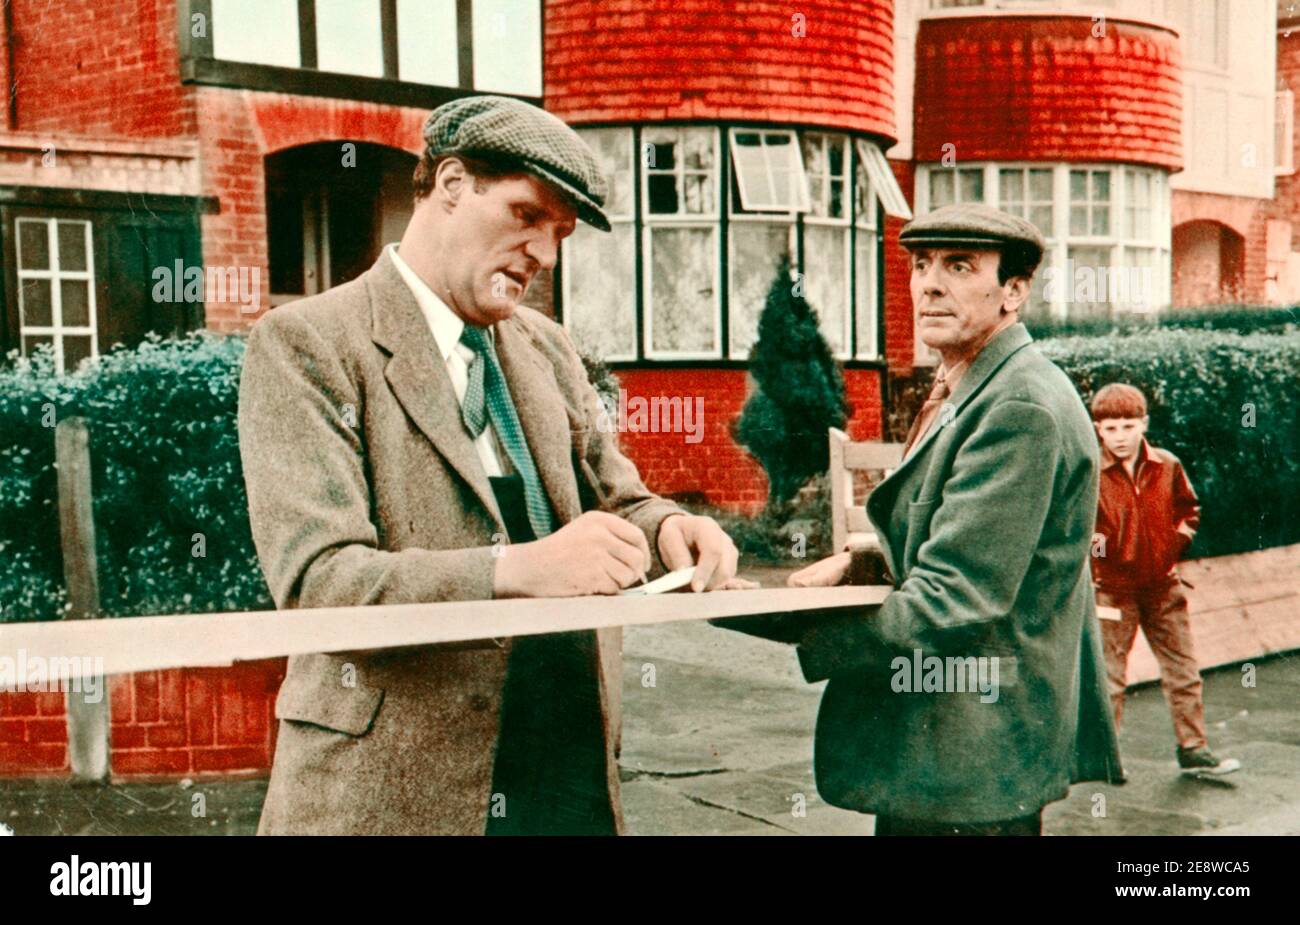 The Plank is a 1967 British slapstick comedy film starring Tommy Cooper and Eric Sykes. Tommy Cooper was born on march 19 1921 and died april 15 1984. Stock Photo